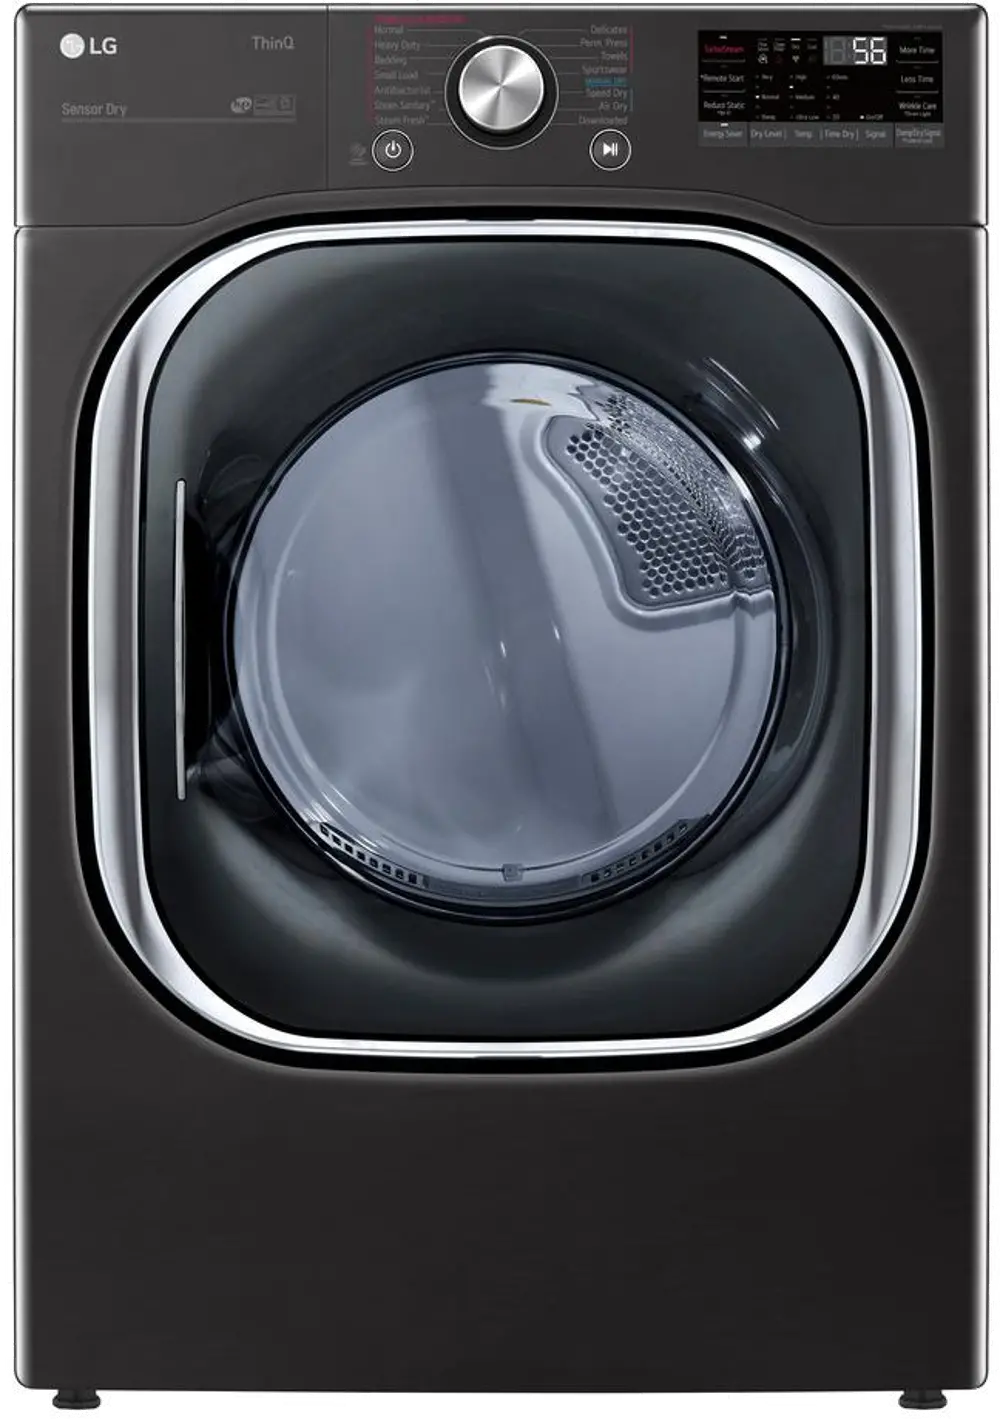 DLGX4501B LG Smart Front Load Dryer with TurboSteam and Built-In Intelligence - 7.4 cu. ft. Black Steel-1